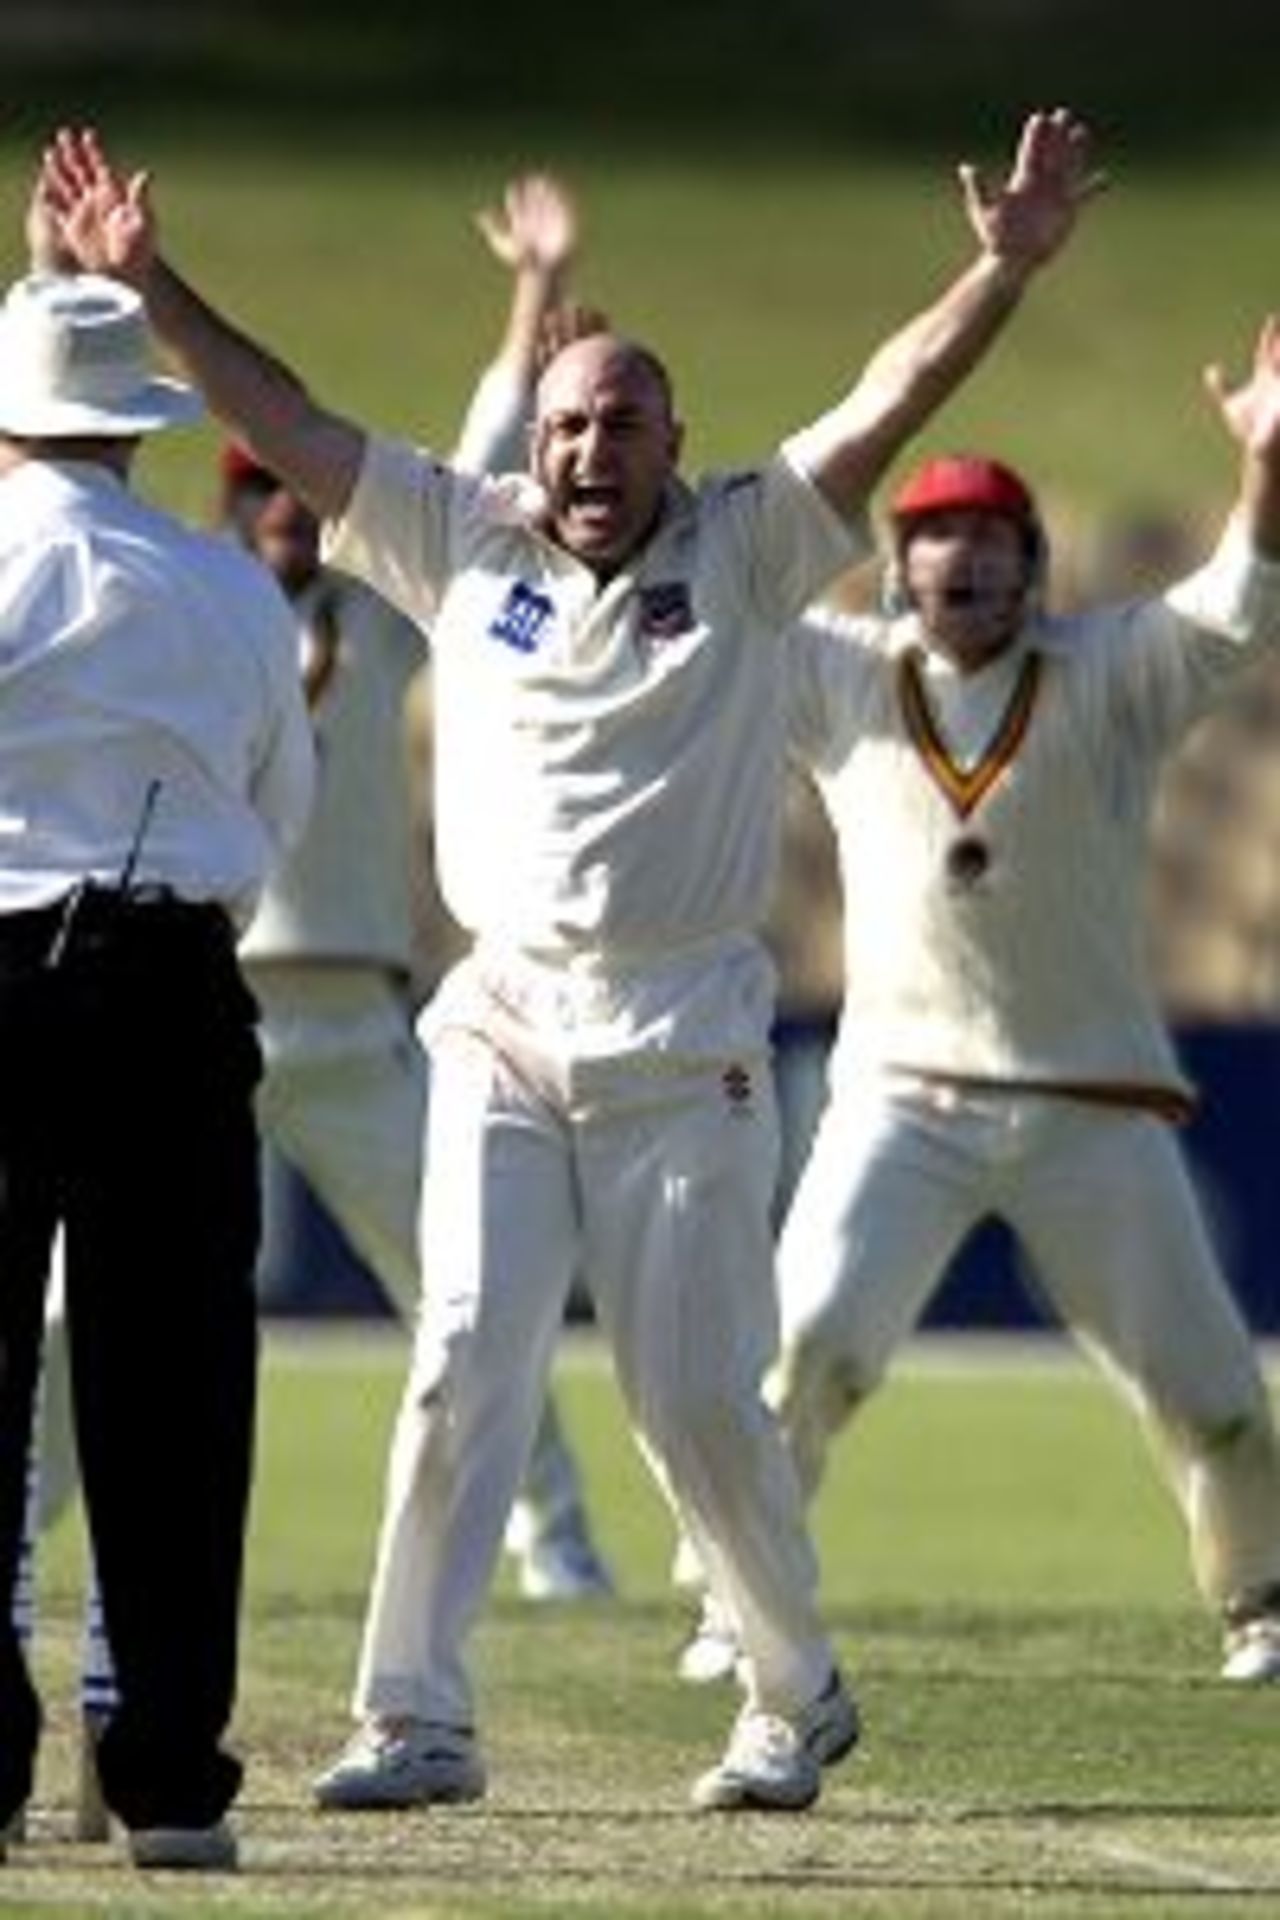 19 Nov 2001: South Australian spin bowler Peter McIntyre appeals for his sixth wicket, Daniel Vettori lbw for 0, in the match between South Australia and New Zealand played at Adelaide Oval in Adelaide, Australia.